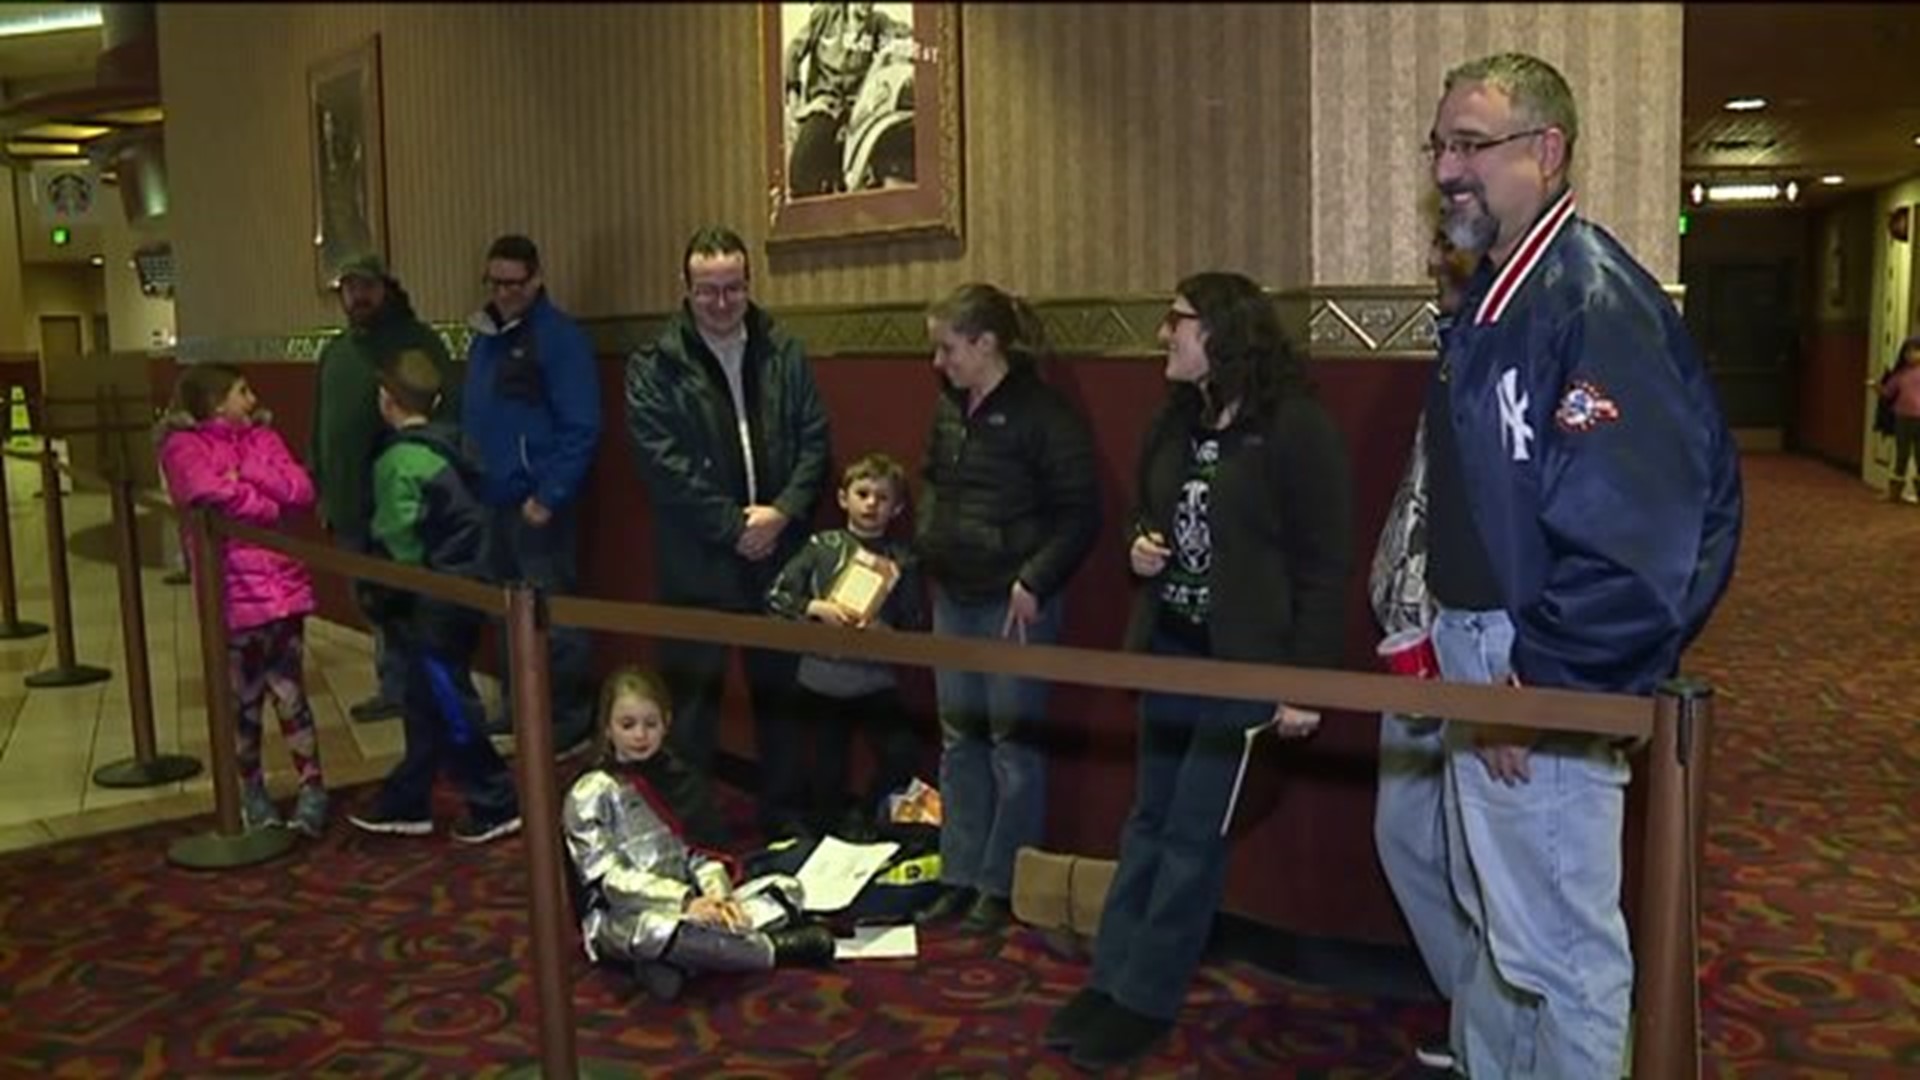 Star Wars Fans Turn Out In "Force" For Opening Of "Rogue One"